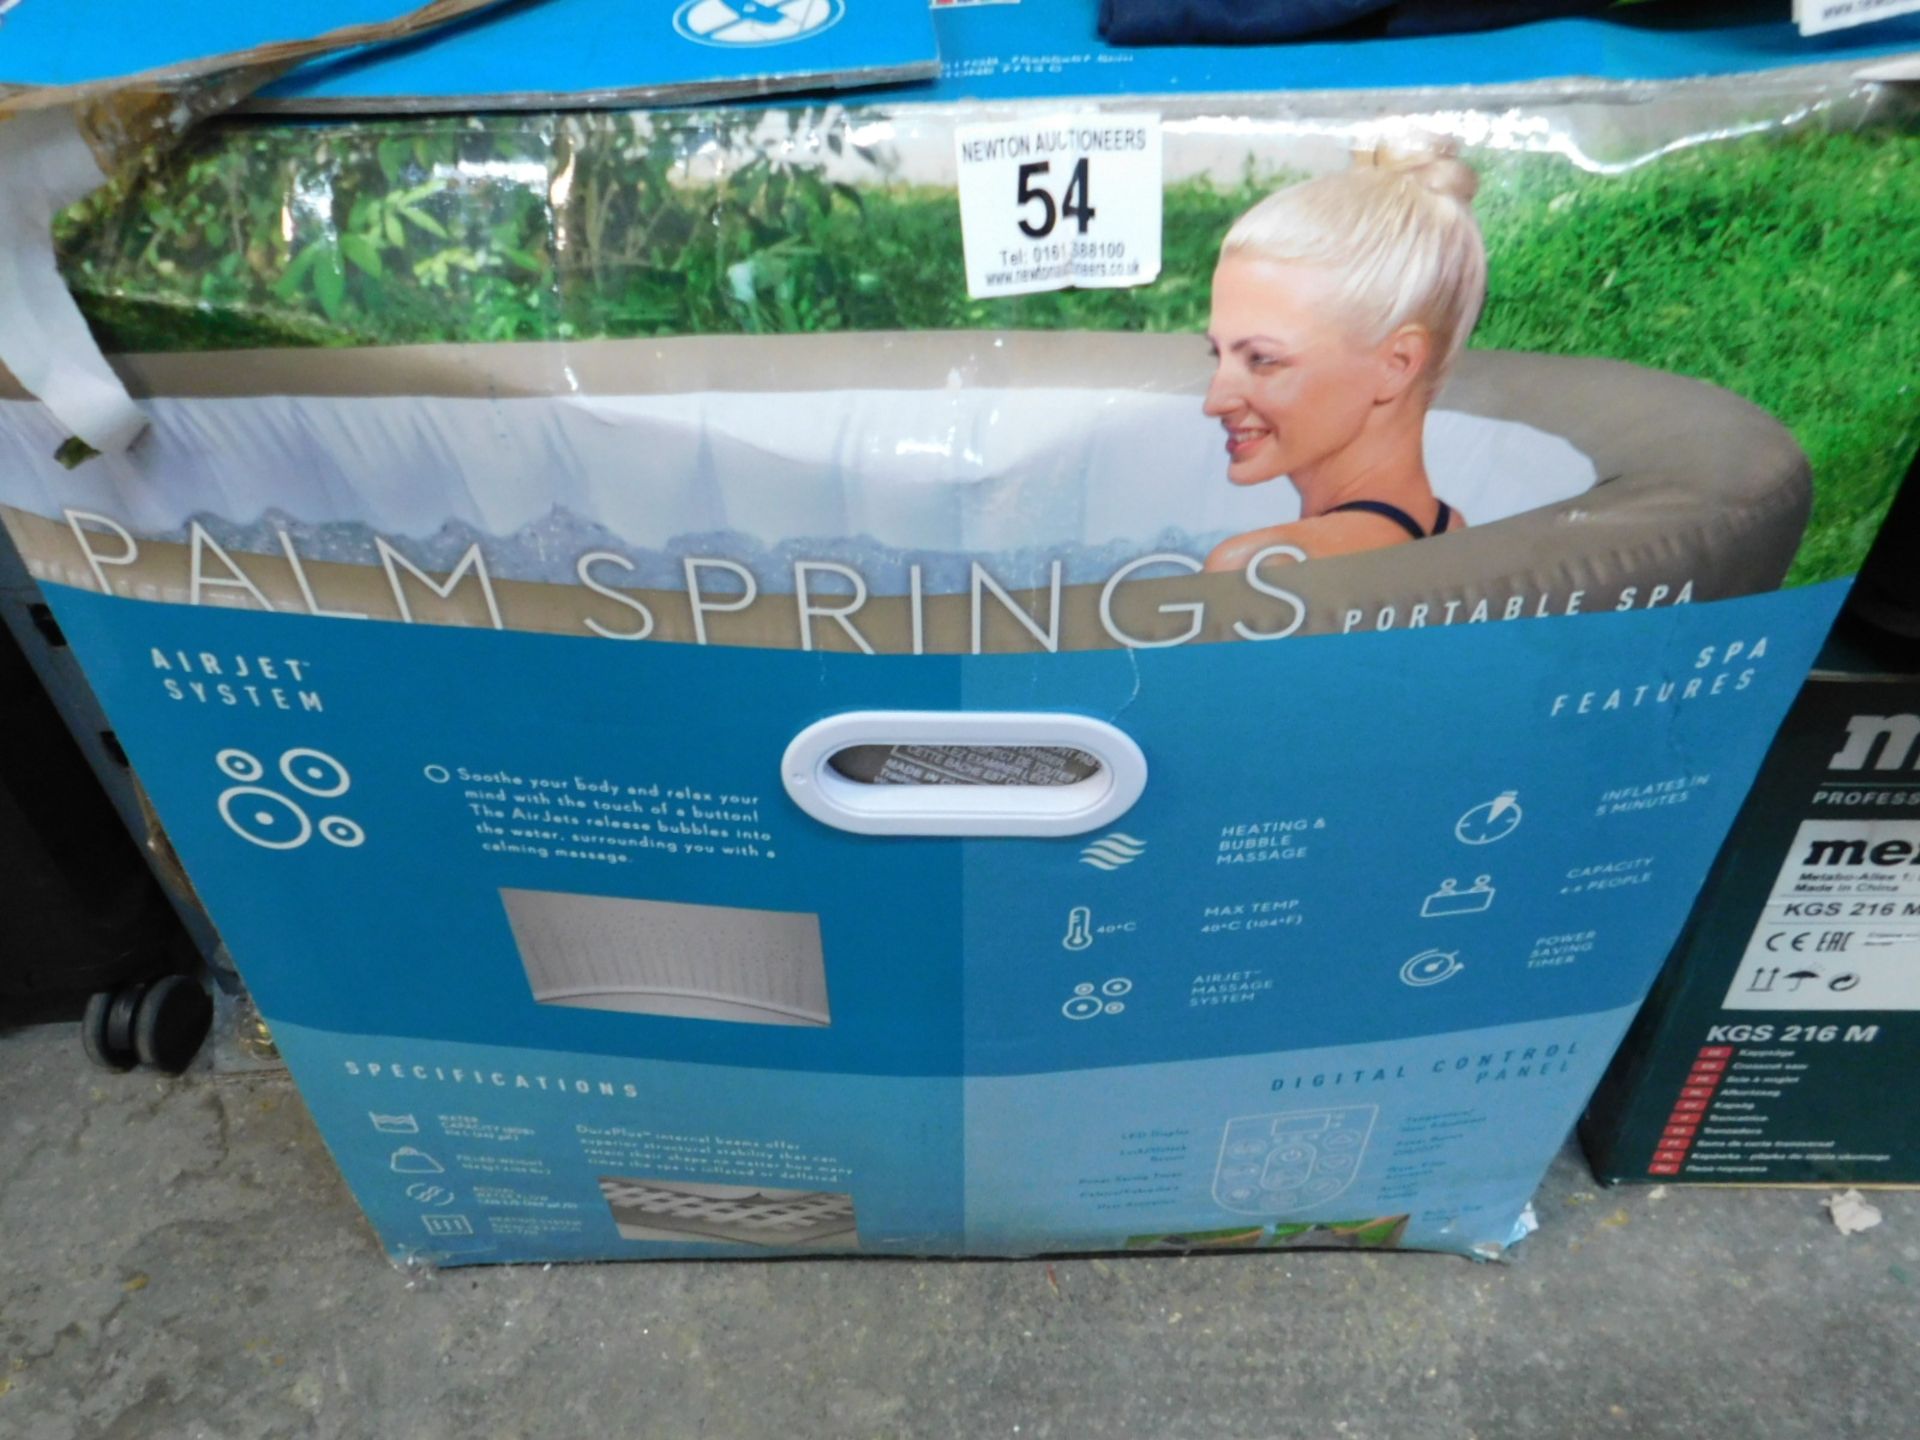 1 BOXED LAY-Z-SPA PALM SPRINGS INFLATABLE 4-6 PERSON SPA RRP Â£599 (PICTURES FOR ILLUSTRATION